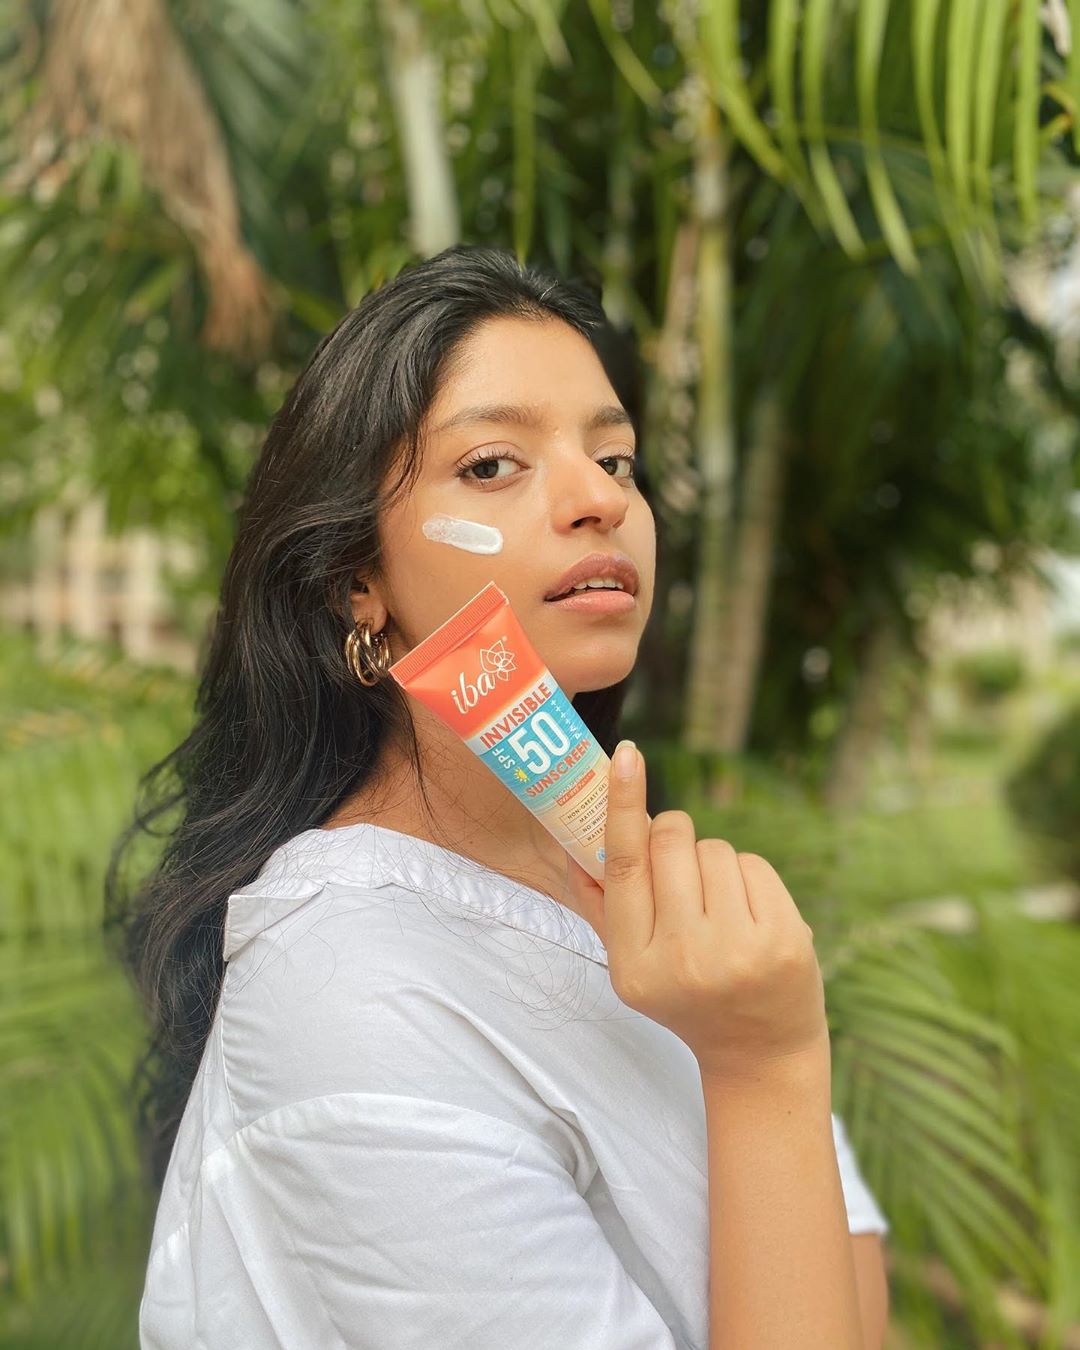 Iba - The stepping out essentials checklist is changing in current times (mask, hand sanitizer) but the one thing that was & will remain in the list is a good Sunscreen 🌞
✨
✨
Iba Invisible Sunscreen S...